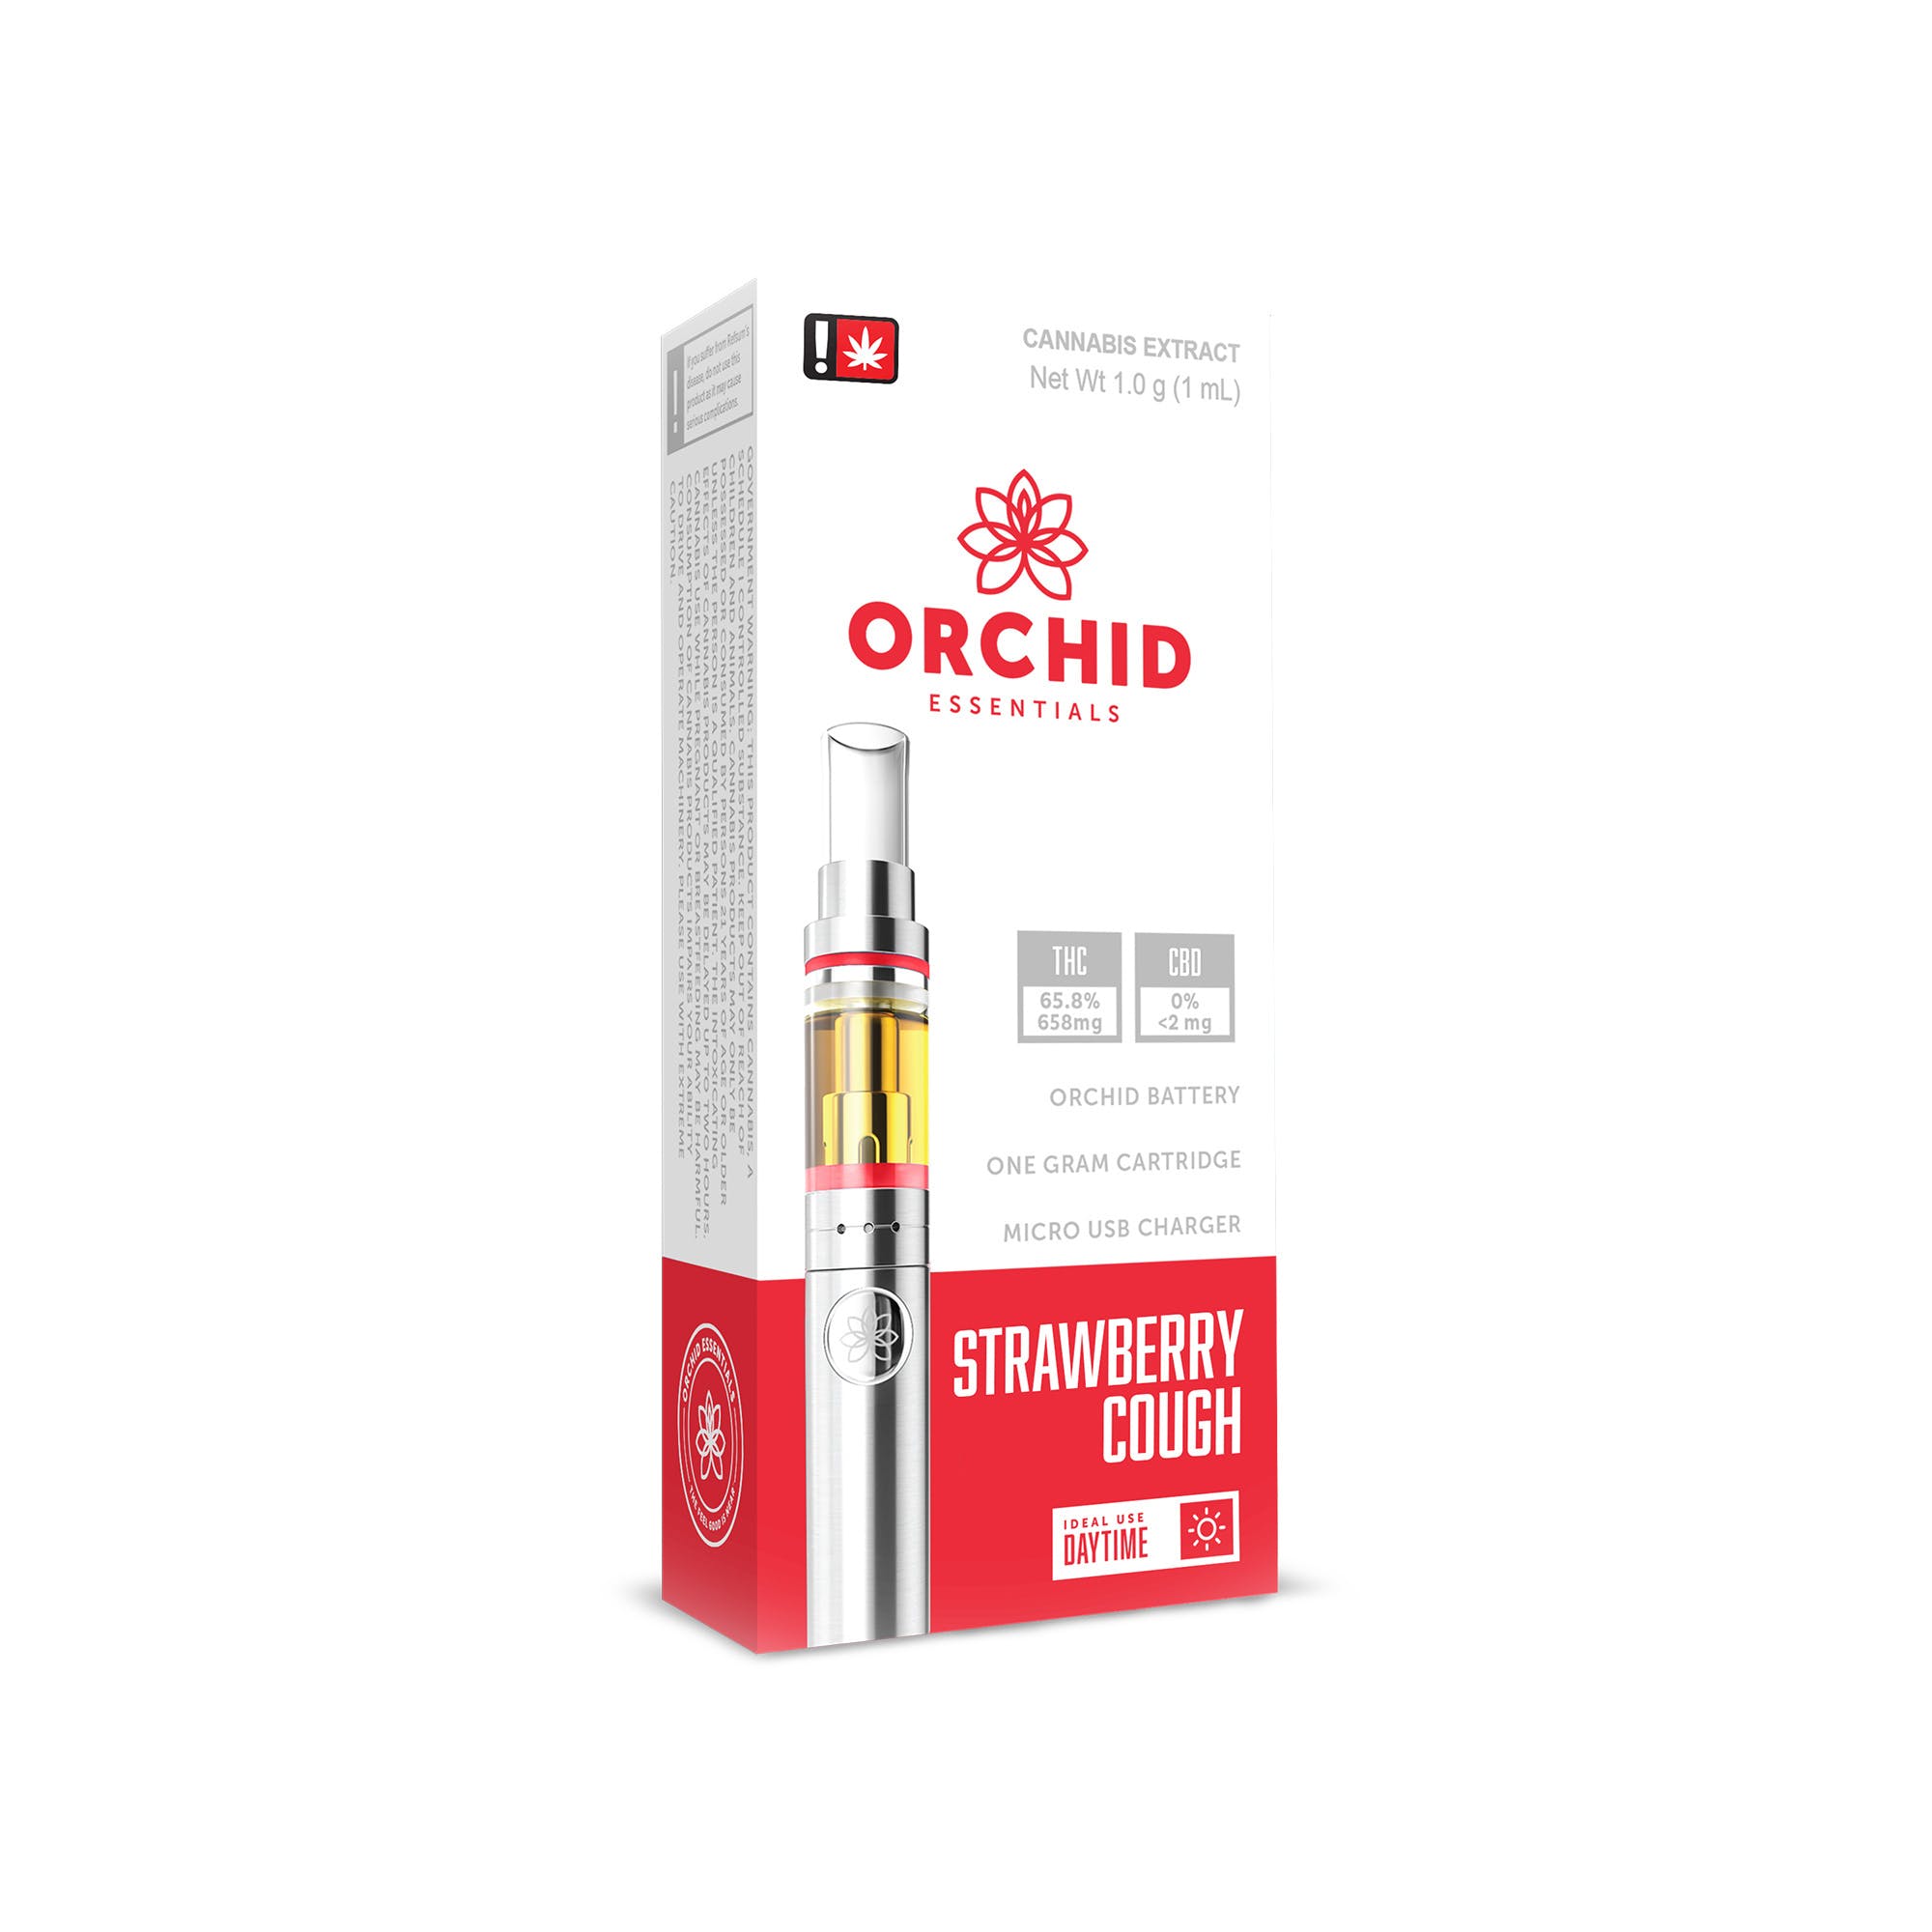 Orchid: 1 G - Strawberry Cough ( Kit )